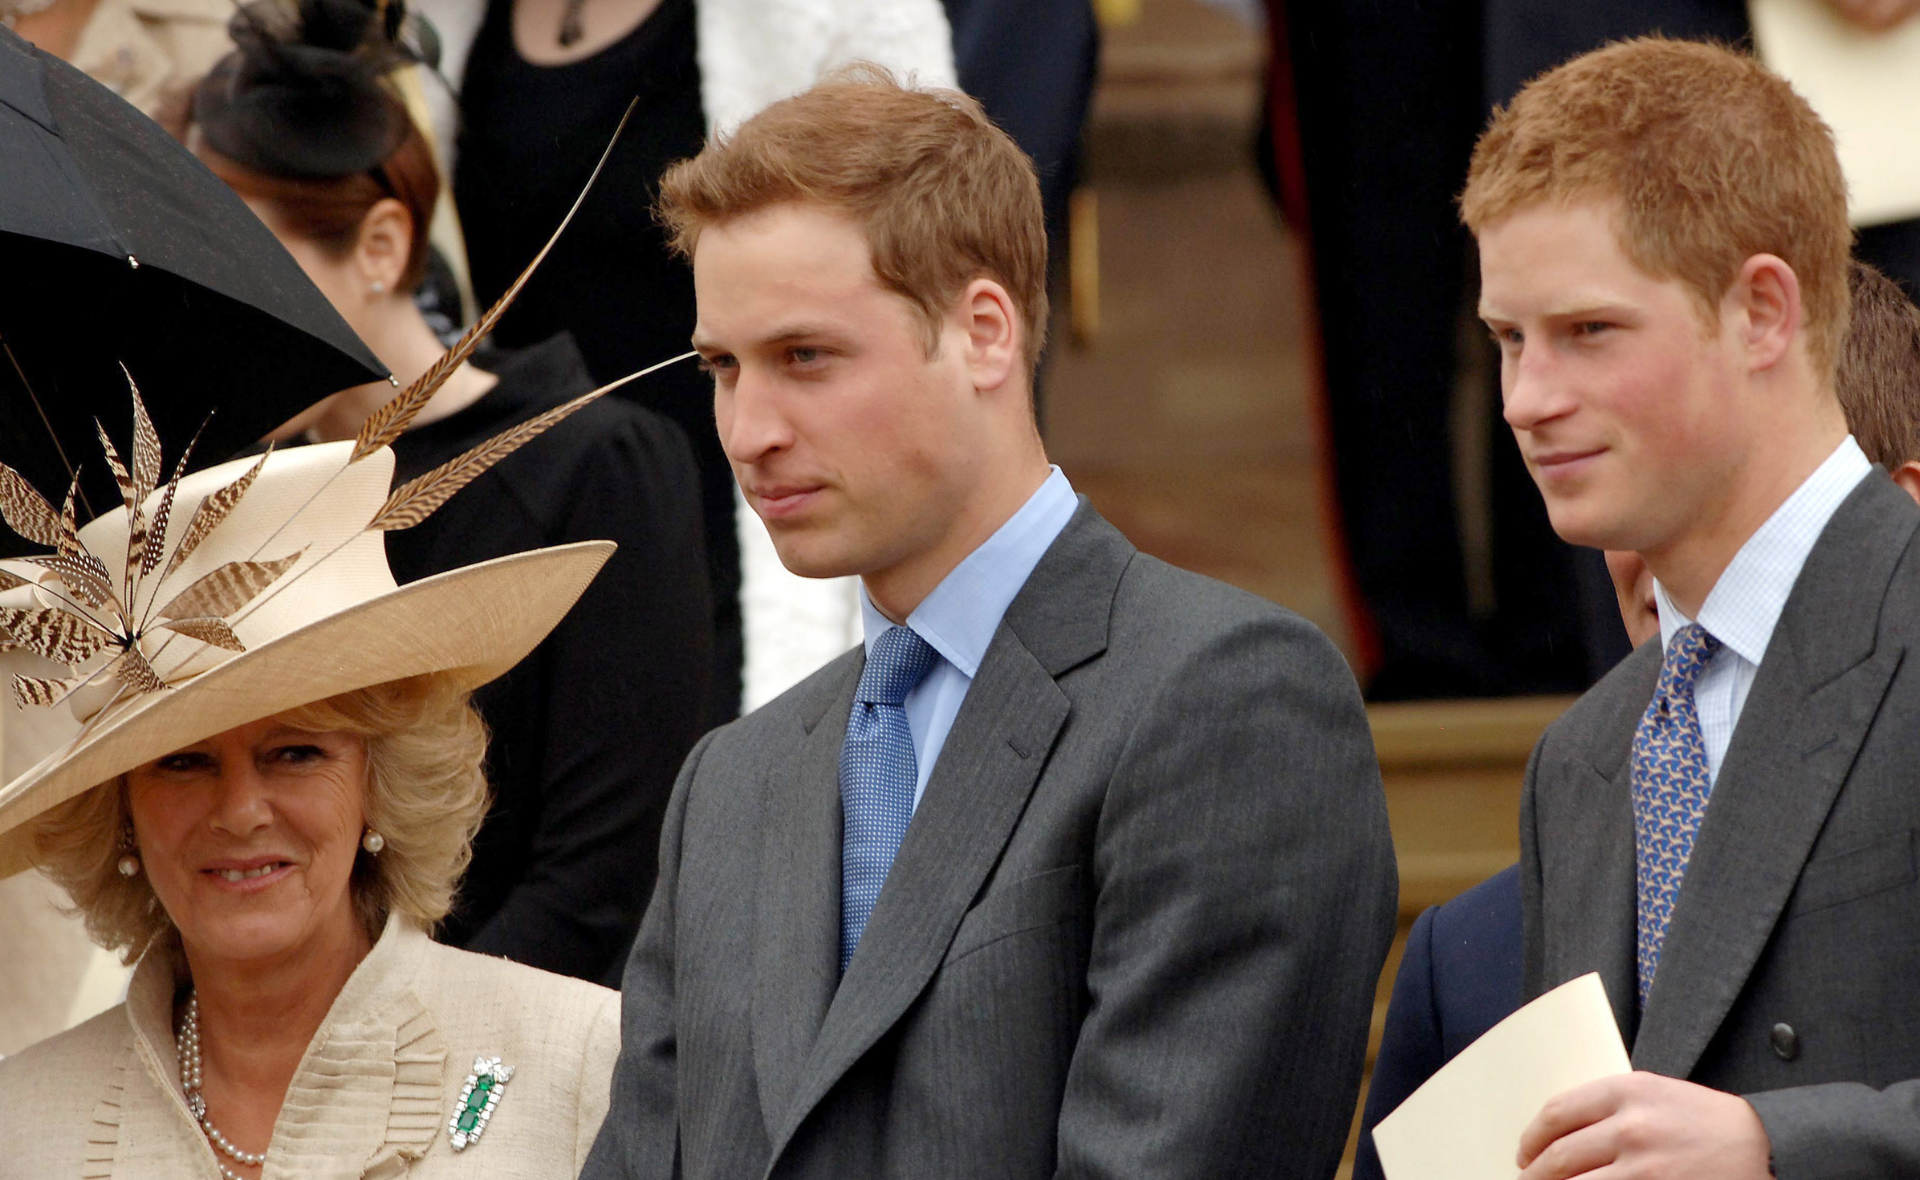 What is Camilla’s relationship with her stepsons Prince William and Prince Harry like?